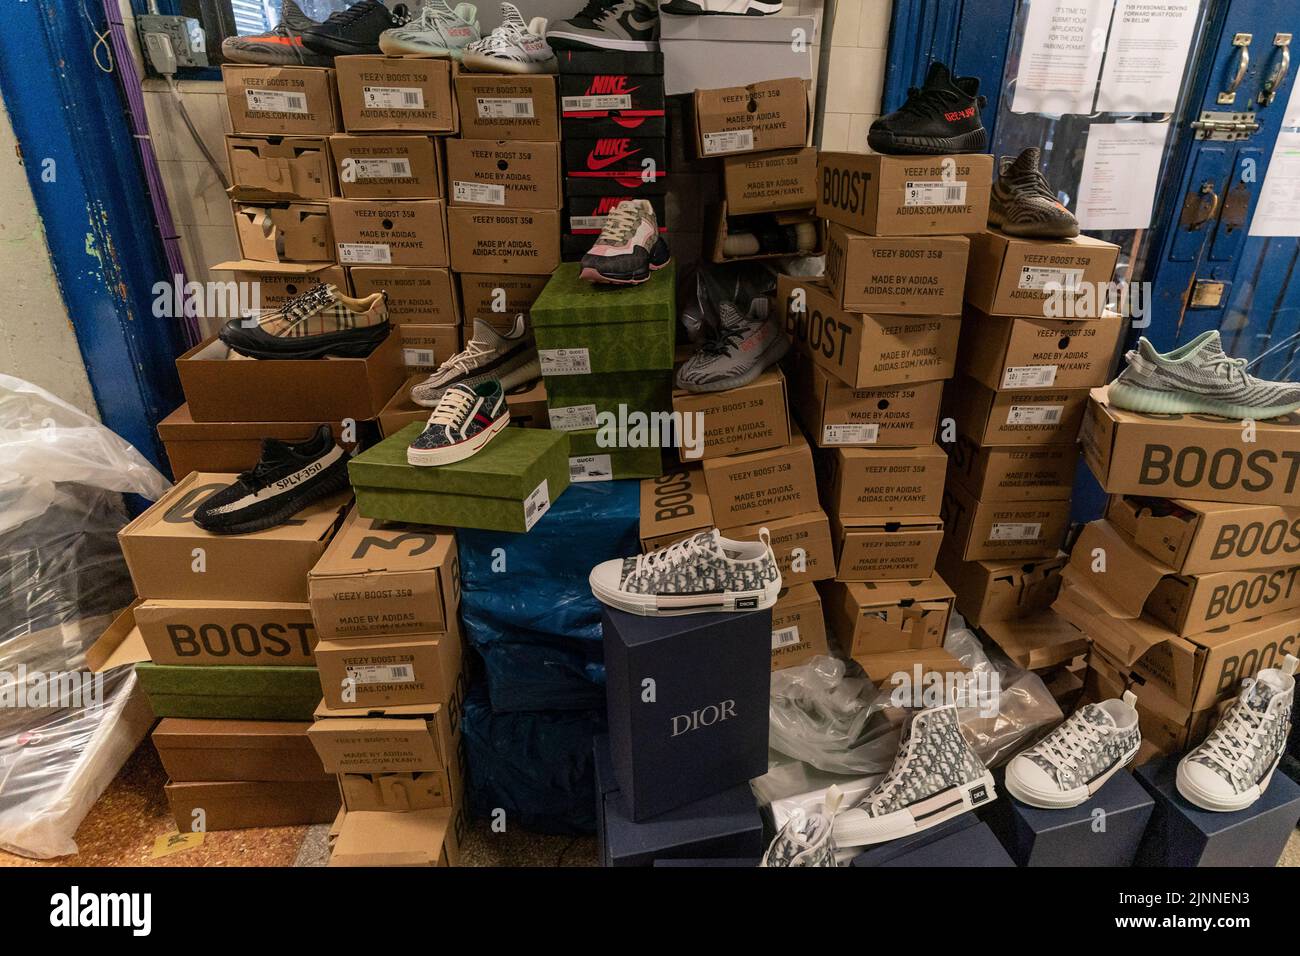 New York, NY - August 12, 2022: counterfeit merchandise on display during NYPD press conference after conclusion of police operation at Traffic Control Division precinct Stock Photo